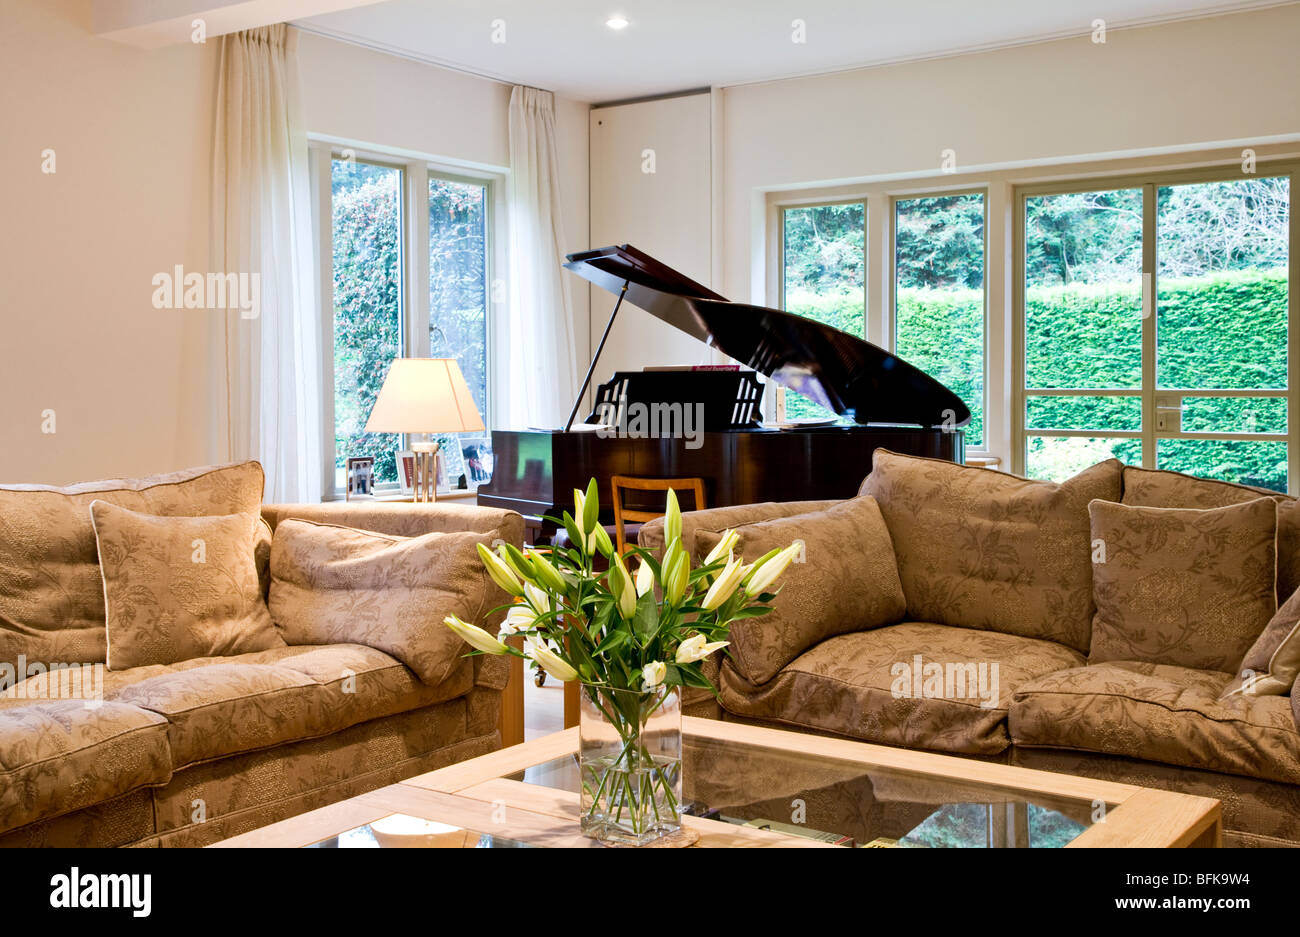 A smart modern stylish lounge, living or sitting room with a baby grand piano and vase of lilies Stock Photo